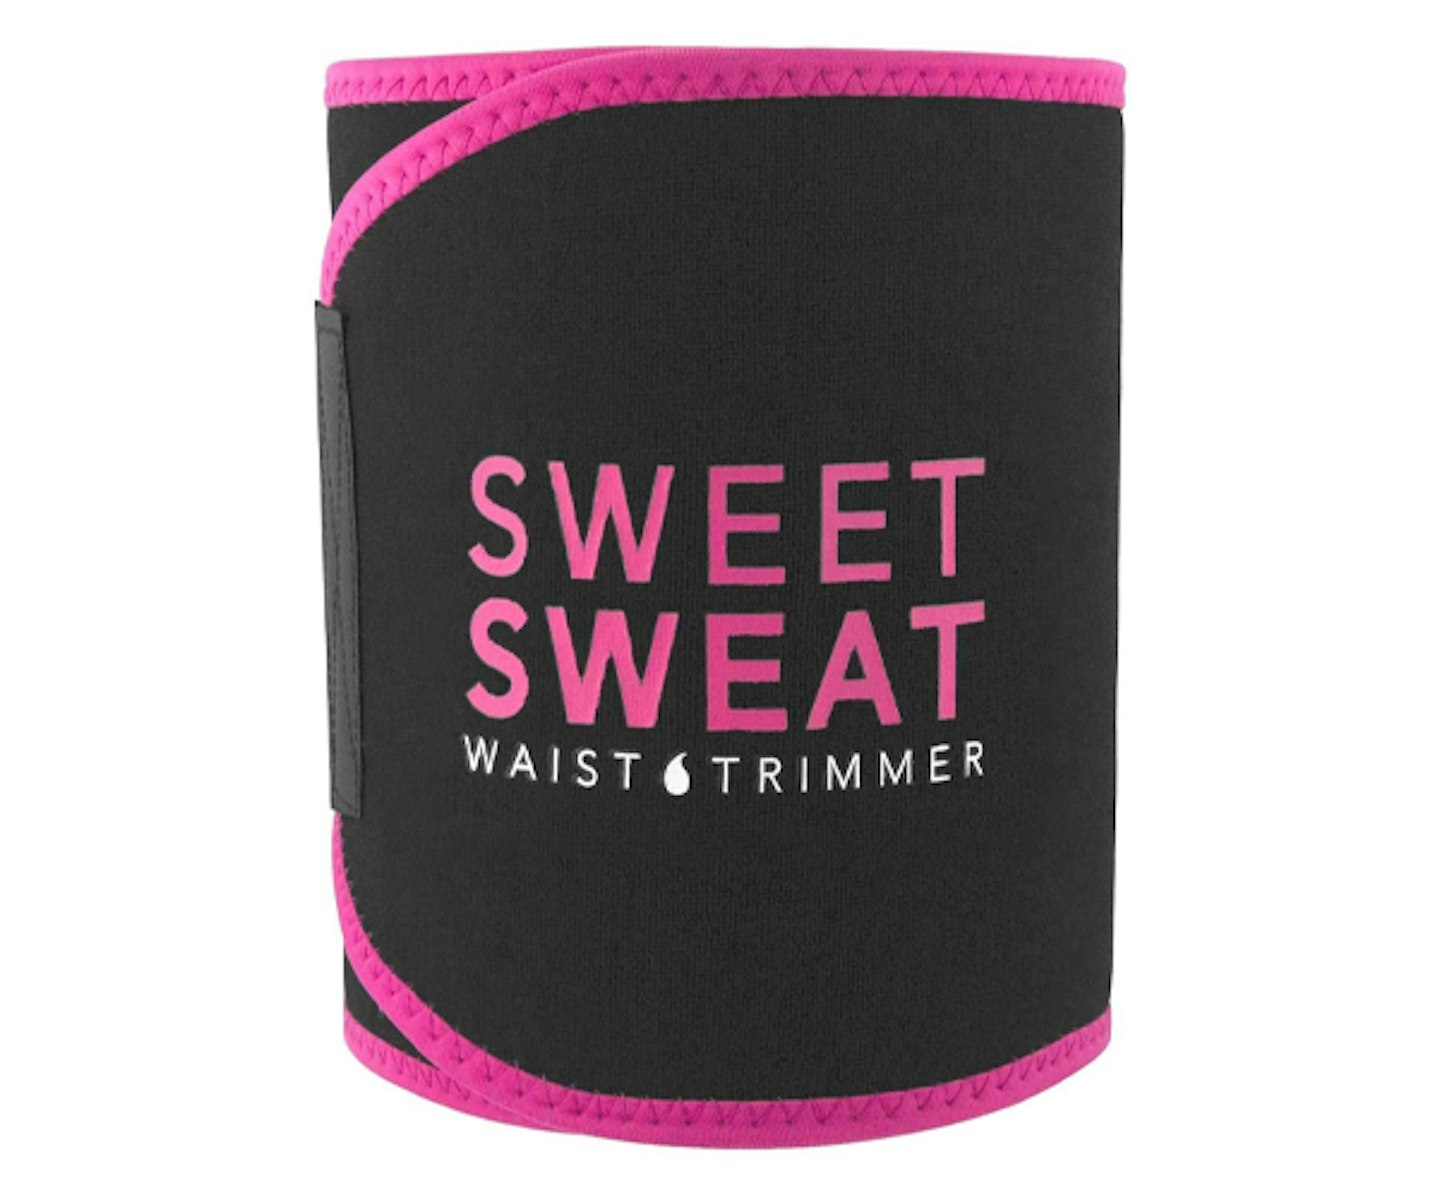 Sweet and Sweat